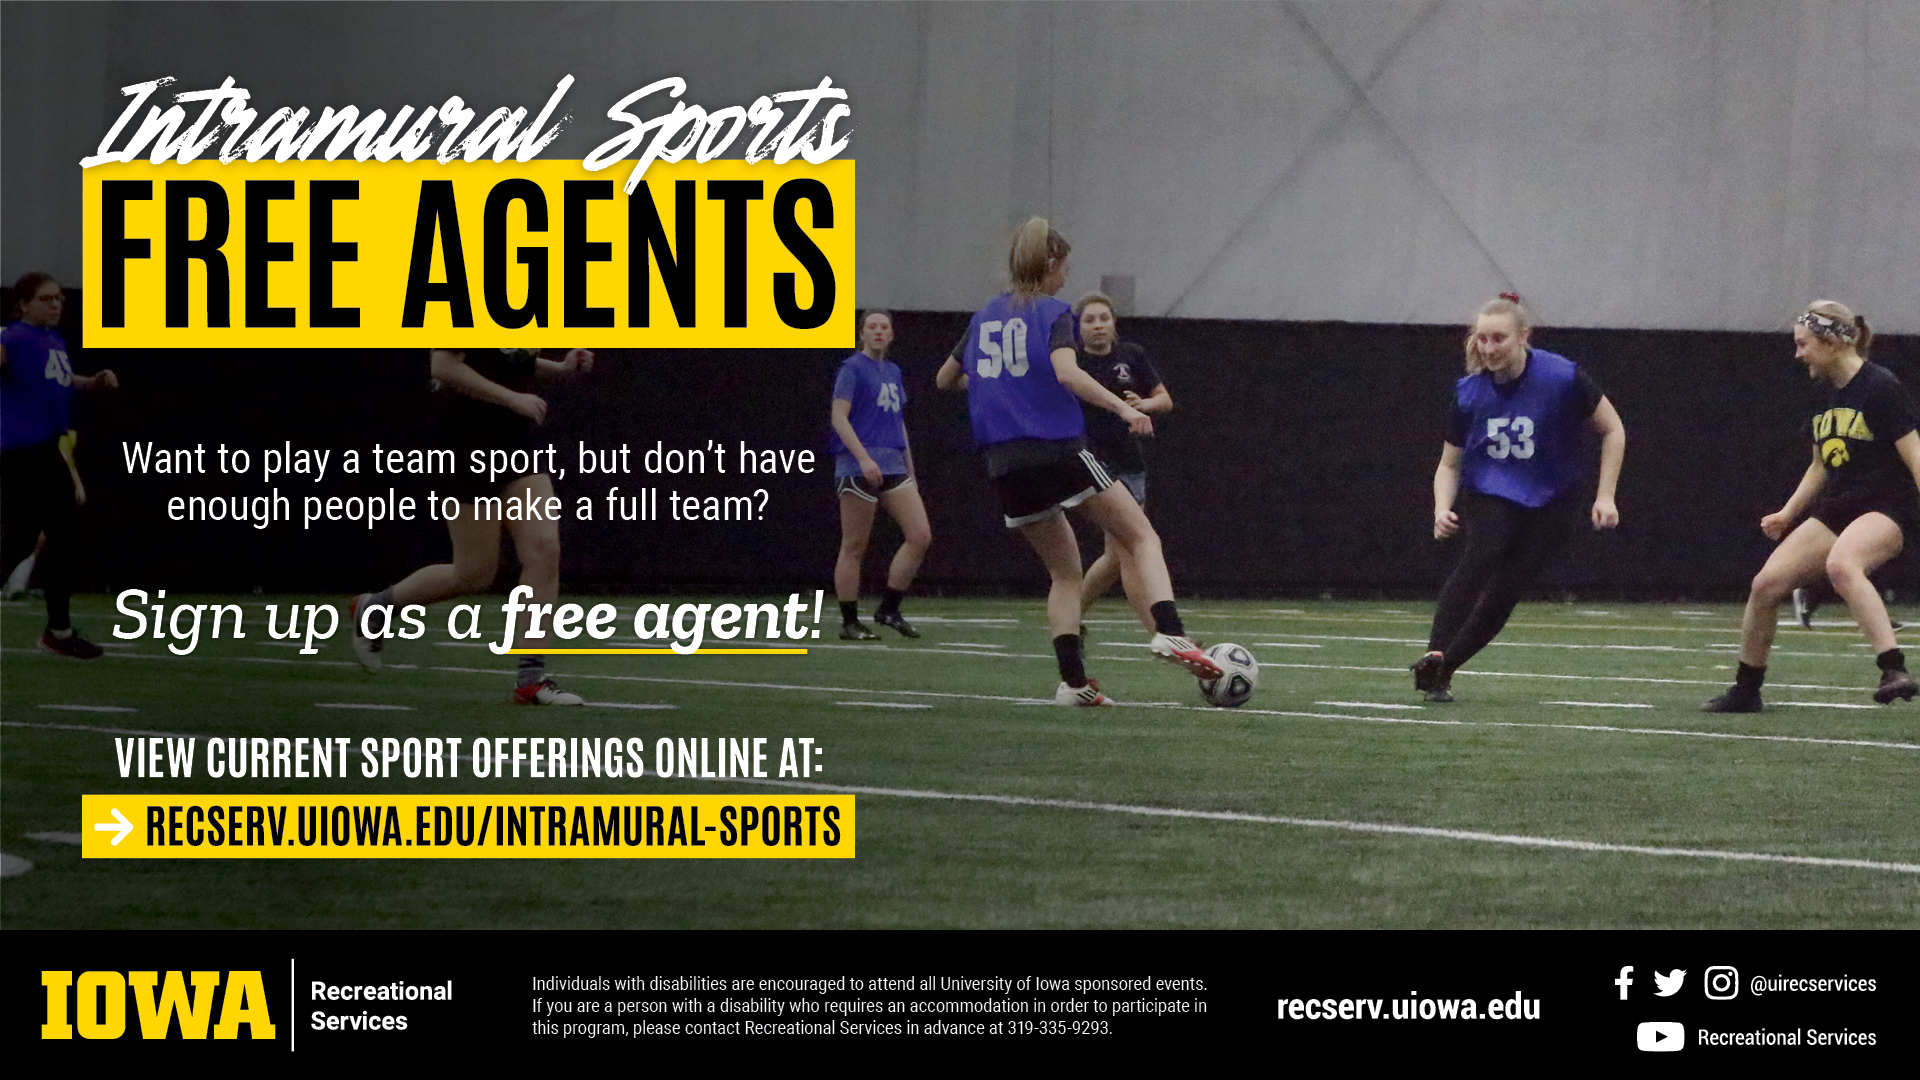 Intramural Sports Free Agents: for more information and to view current sport offerings, visit: recserv.uiowa.edu/intramural-sports